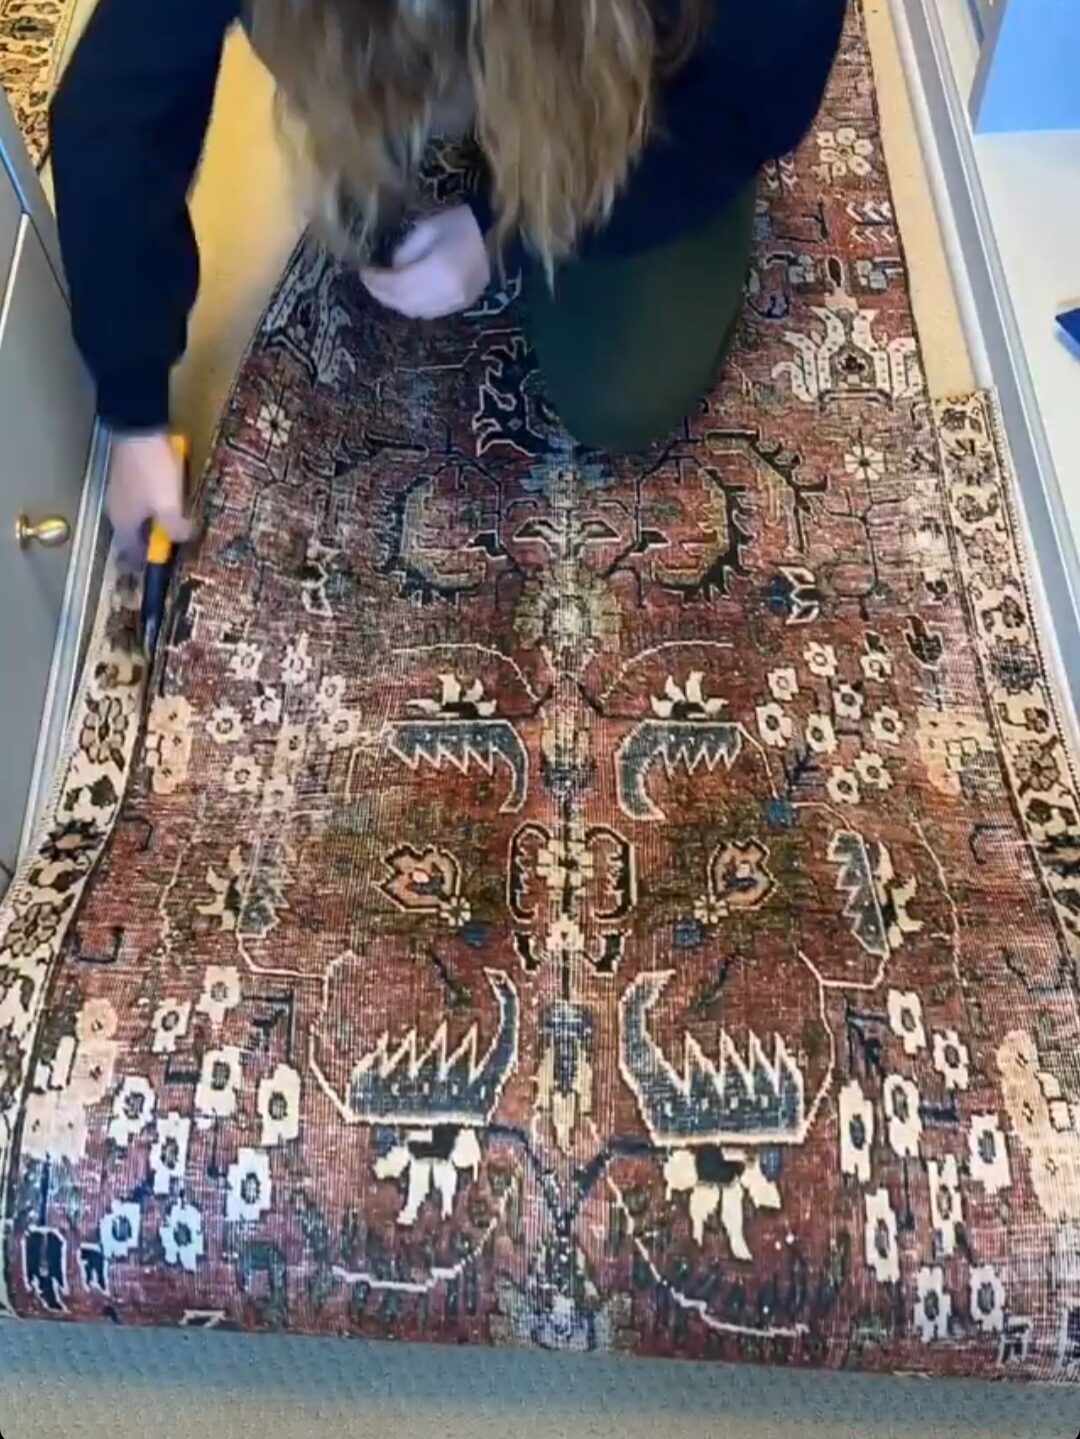 Women continue trimming the edges of a rug.